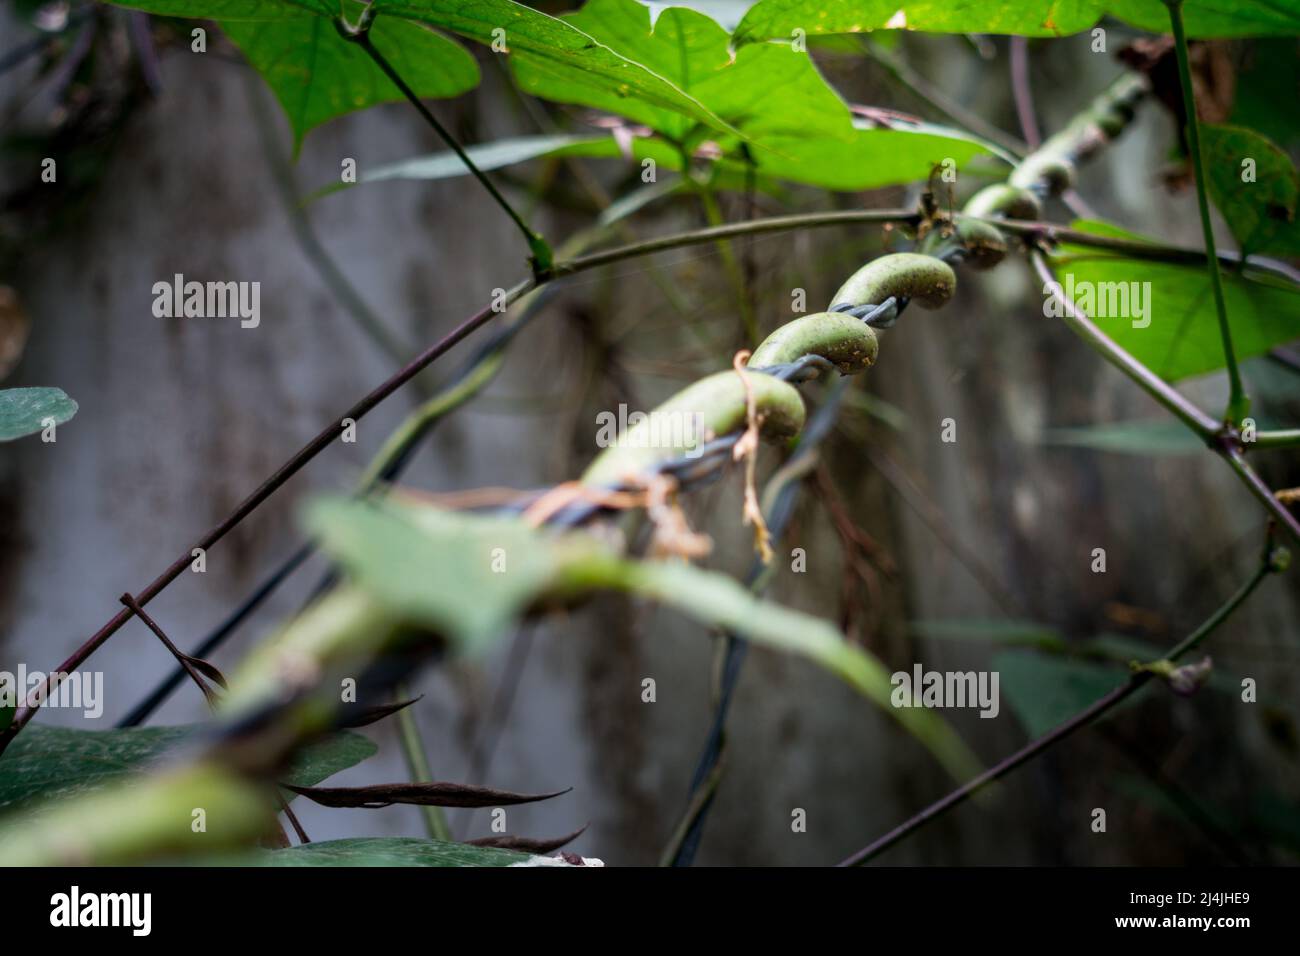 A close up shot of Horticultural climbing plants — A vine is any plant with a growth habit of trailing or scandent (that is, climbing) stems, lianas o Stock Photo